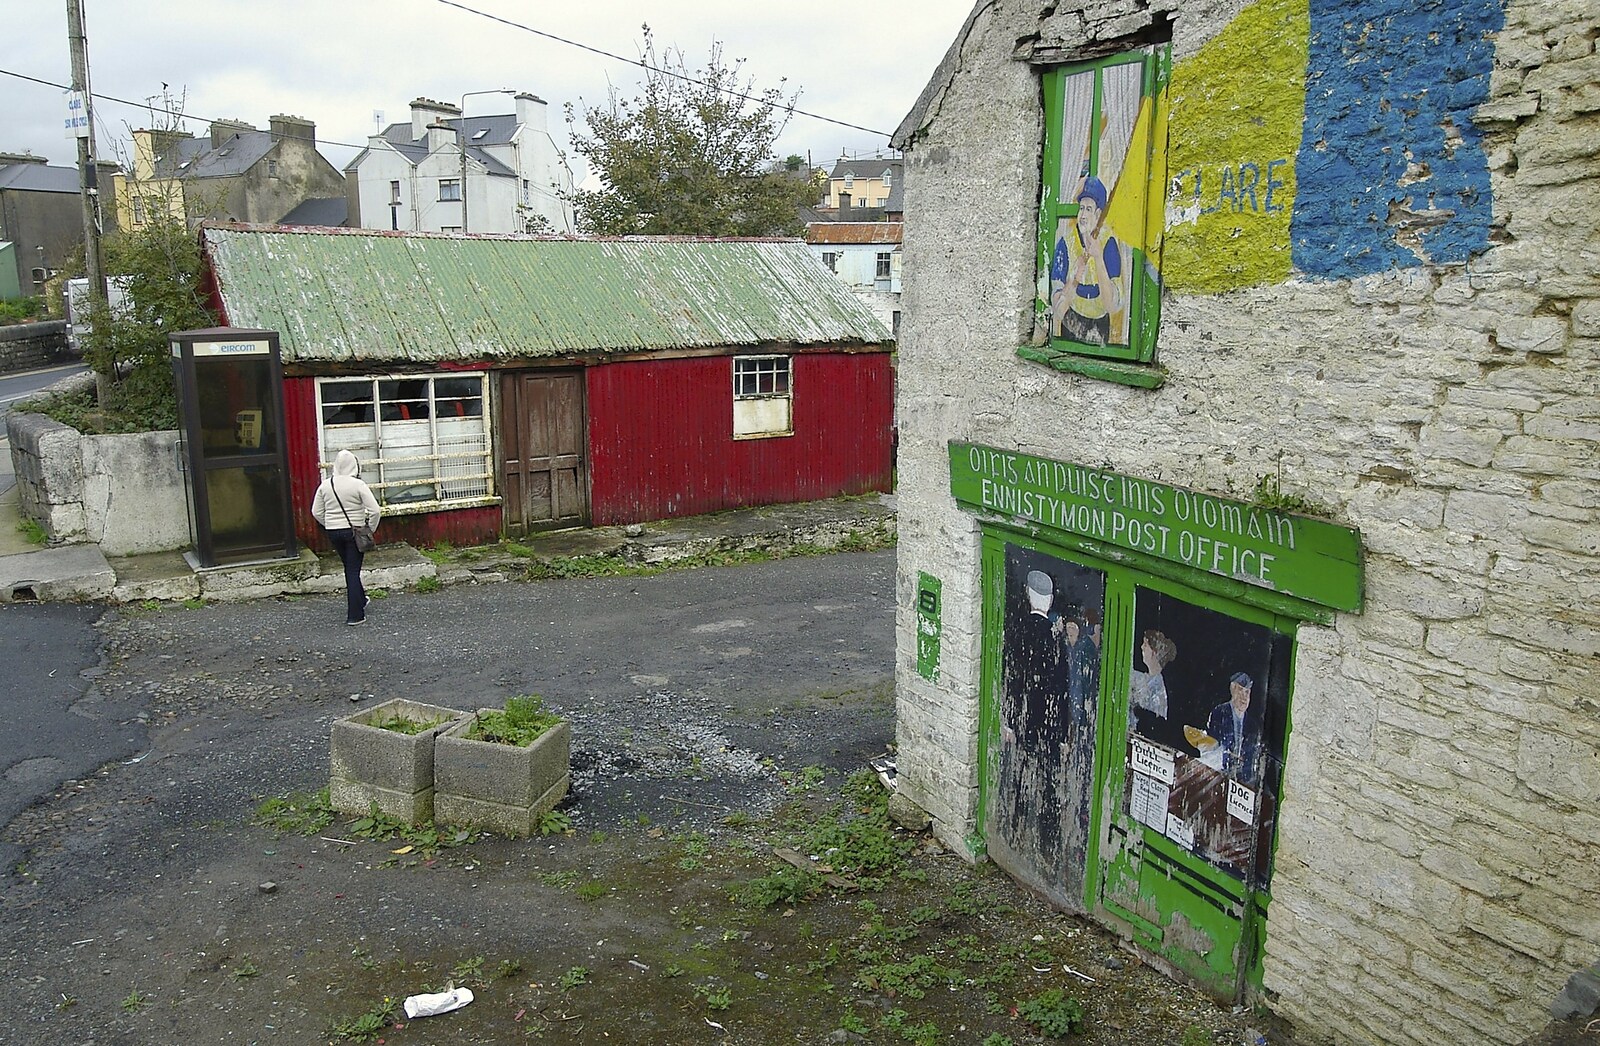 Isobel roams around near derelict buildings from Corofin, Ennistymon and The Burran, County Clare, Western Ireland - 27th October 2006